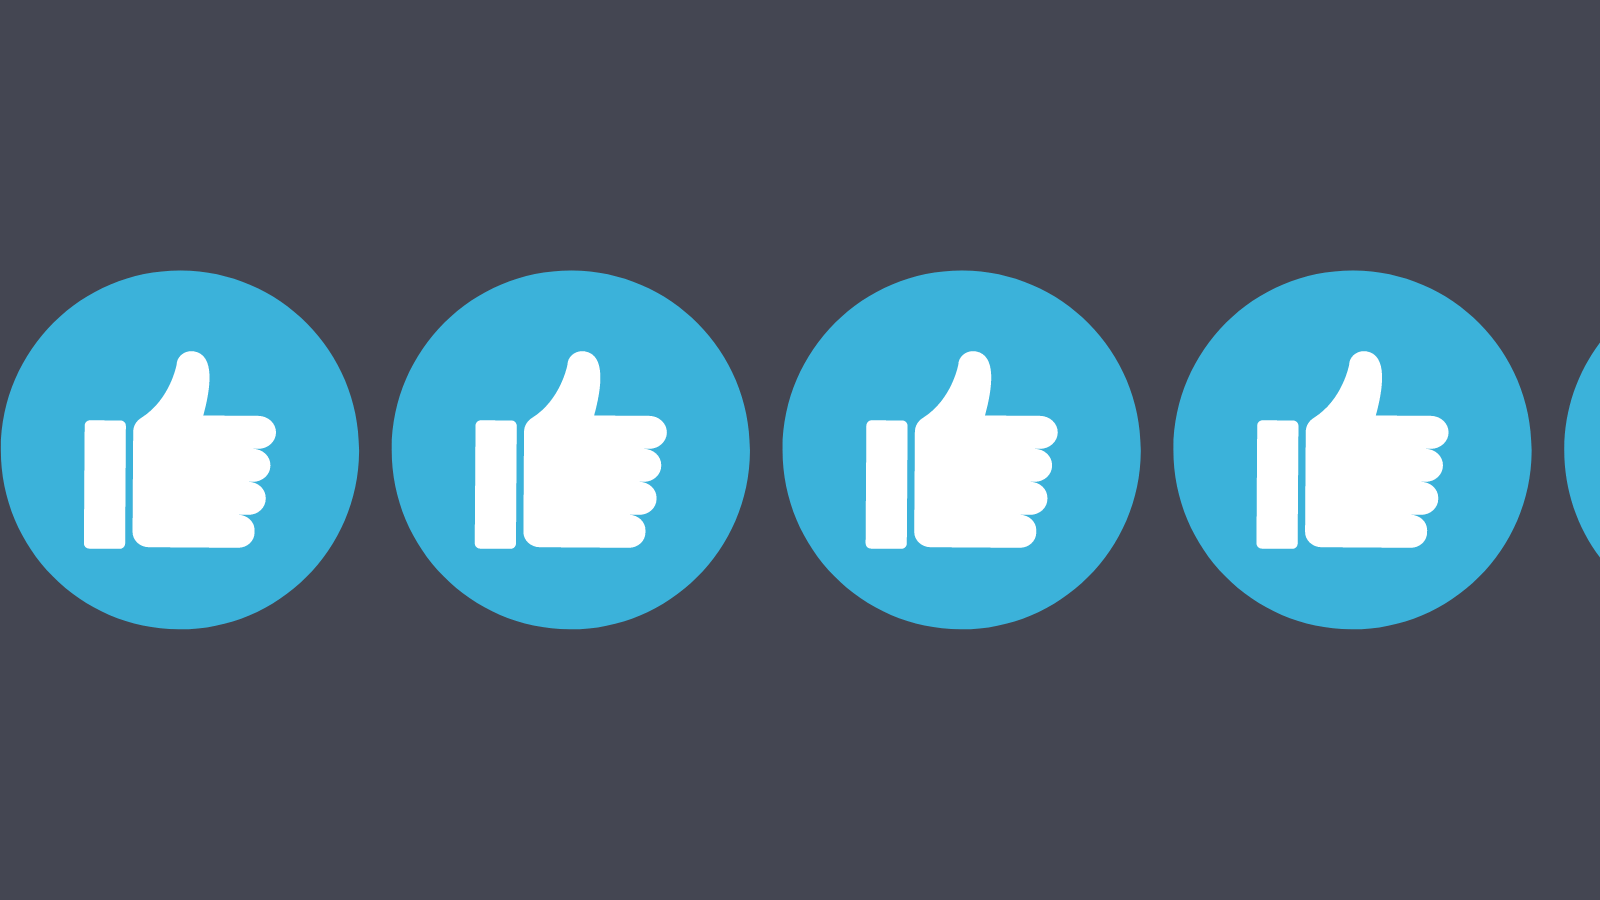 A row of thumbs up icons in blue circles